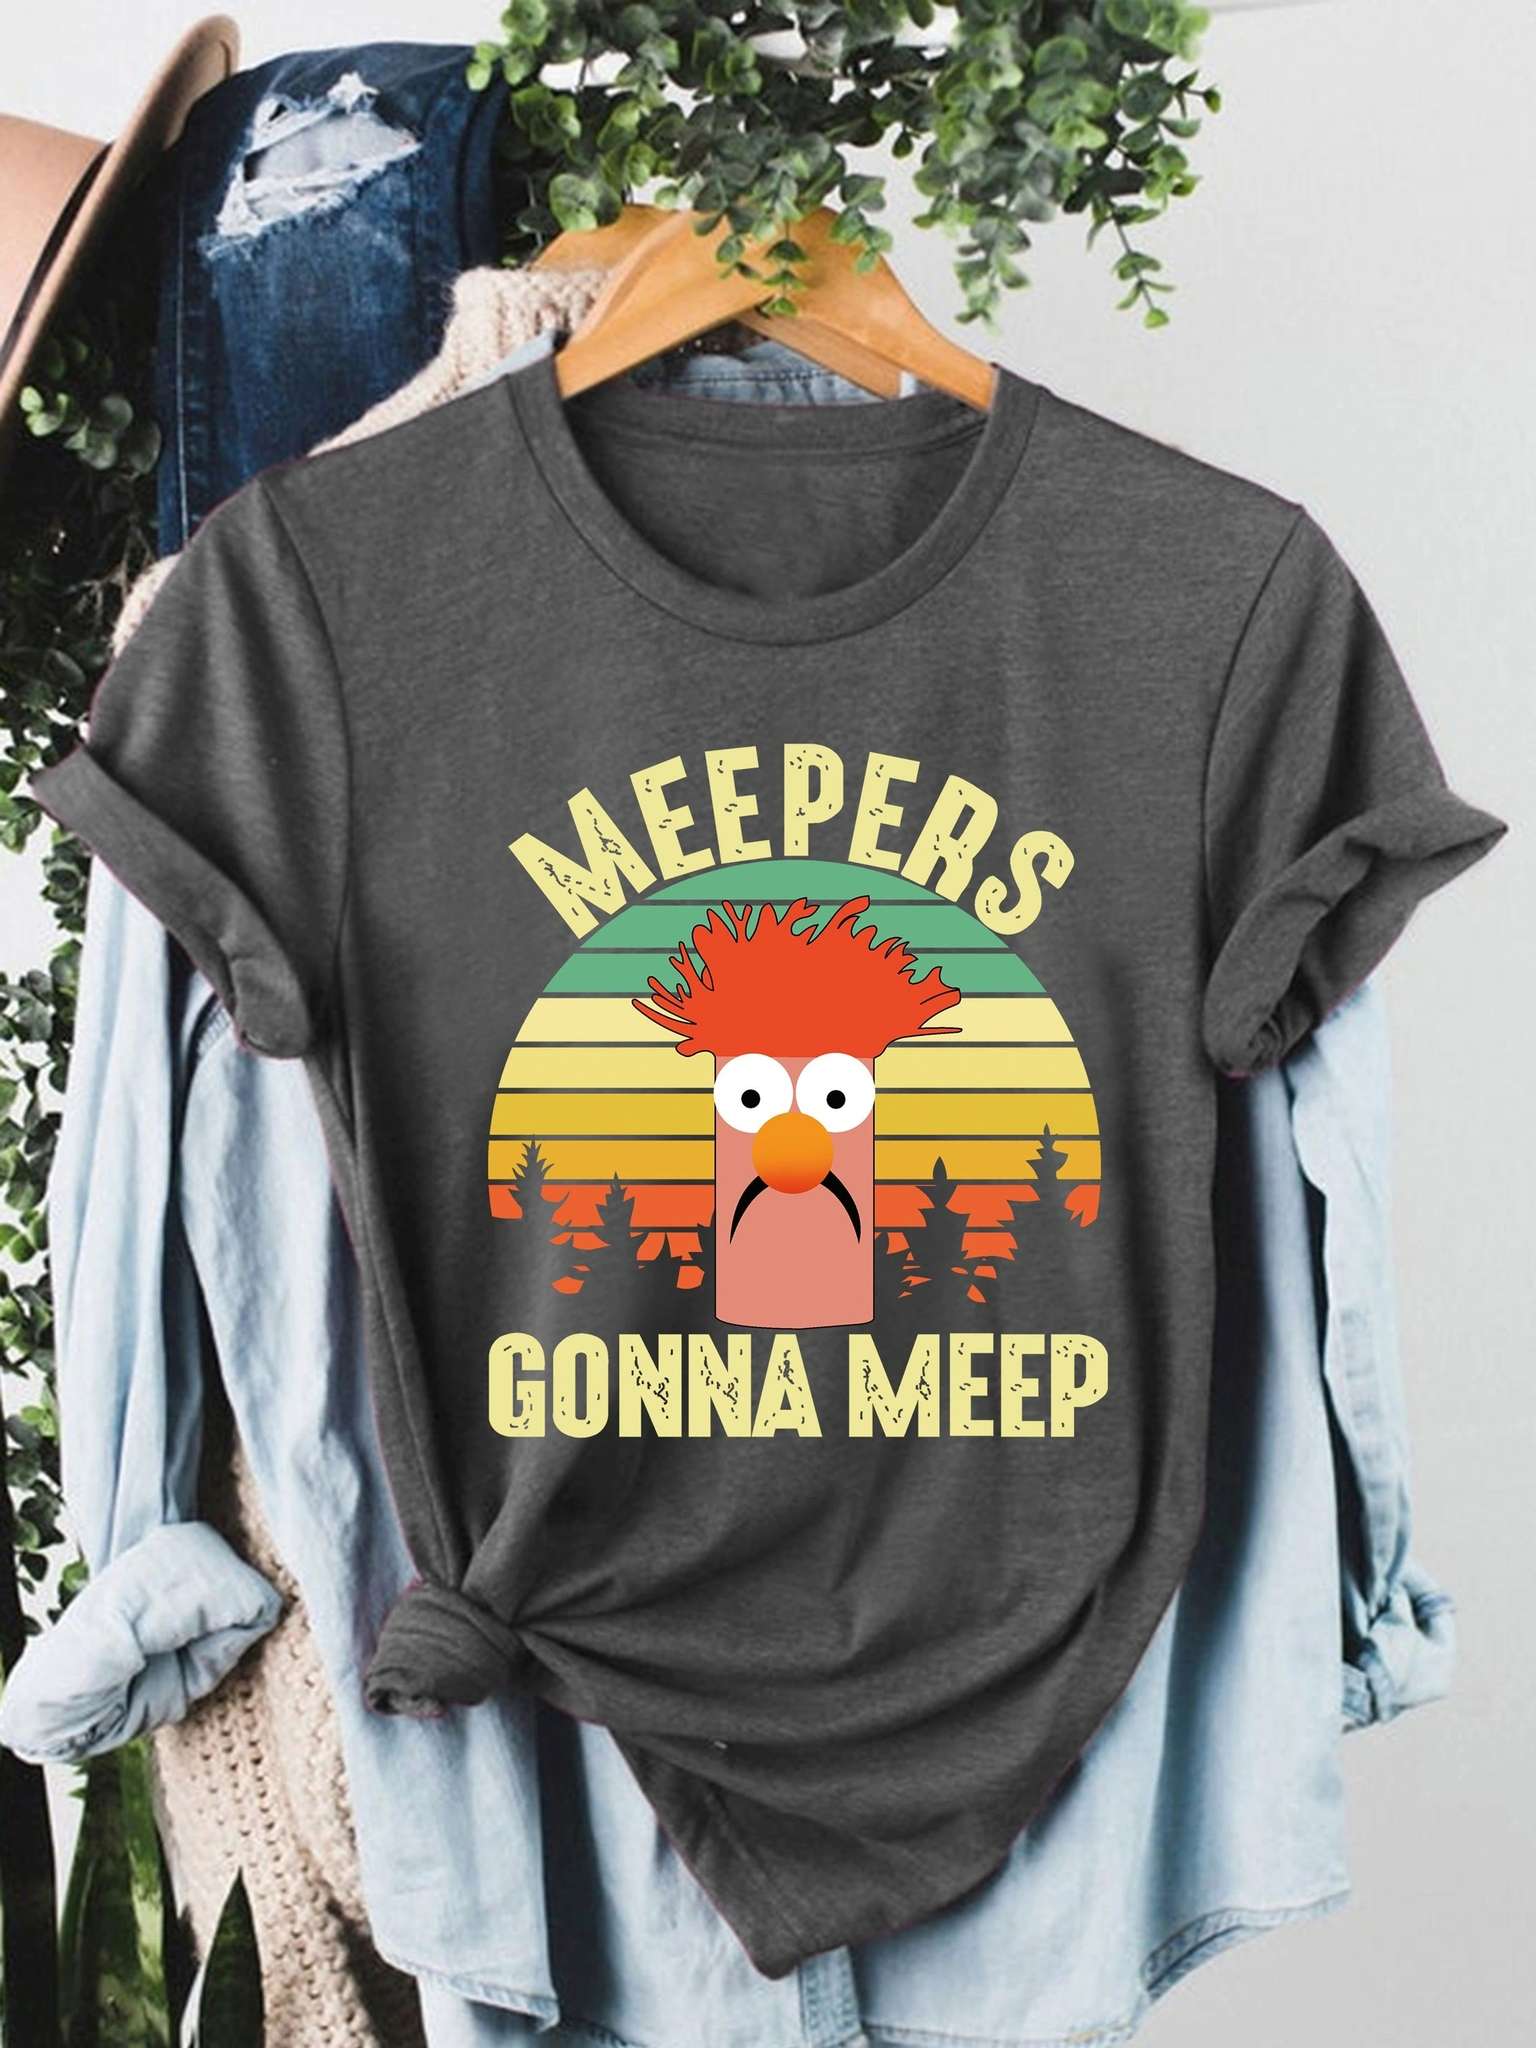 The Muppets - Meepers gonna meep